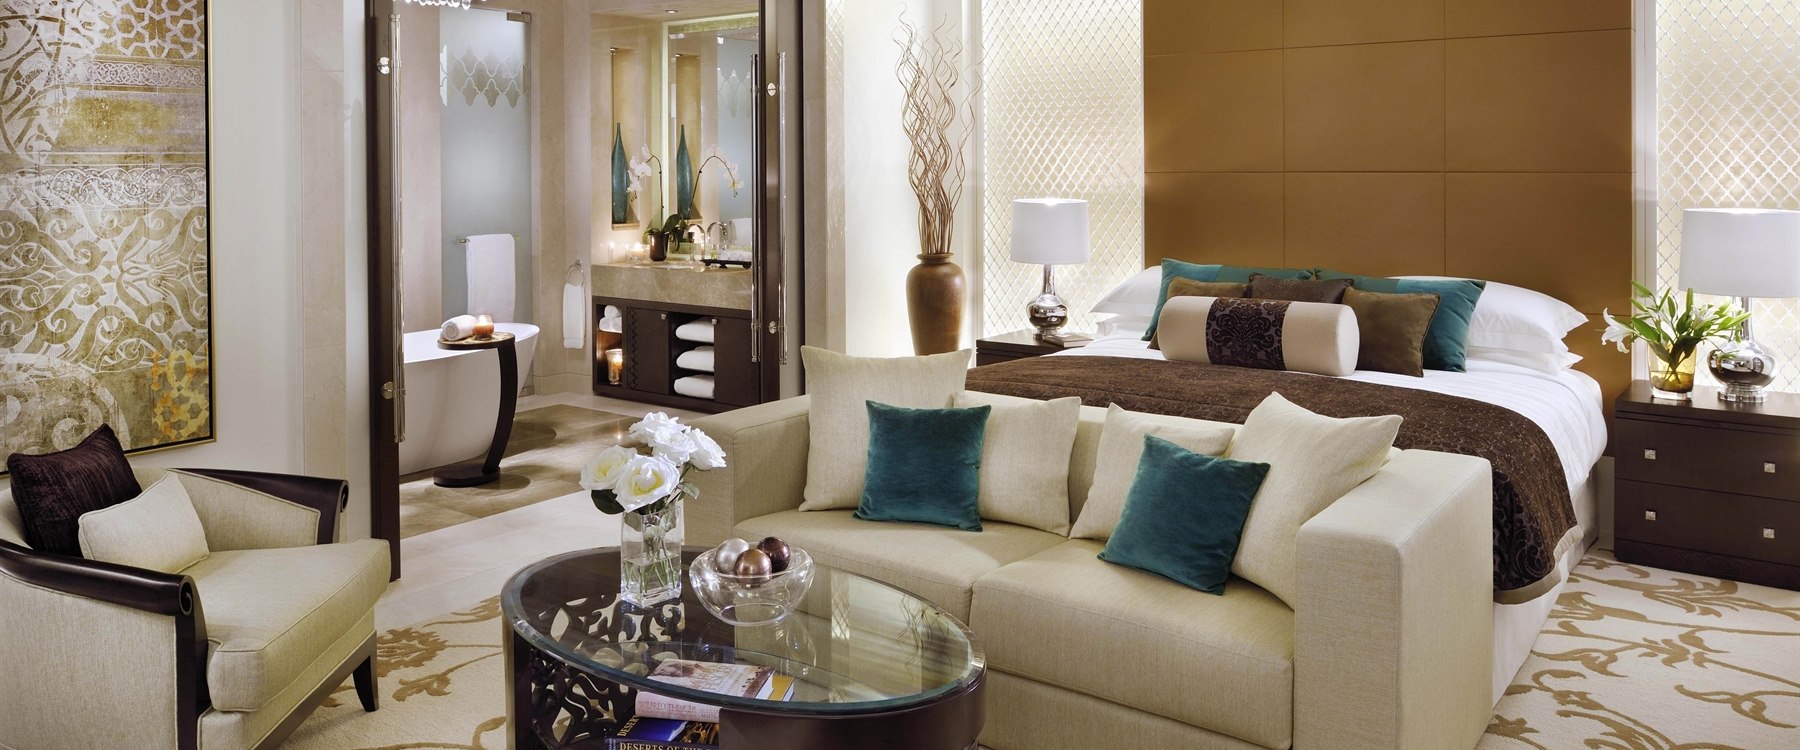 Premiere room at One&Only The Palm, Dubai